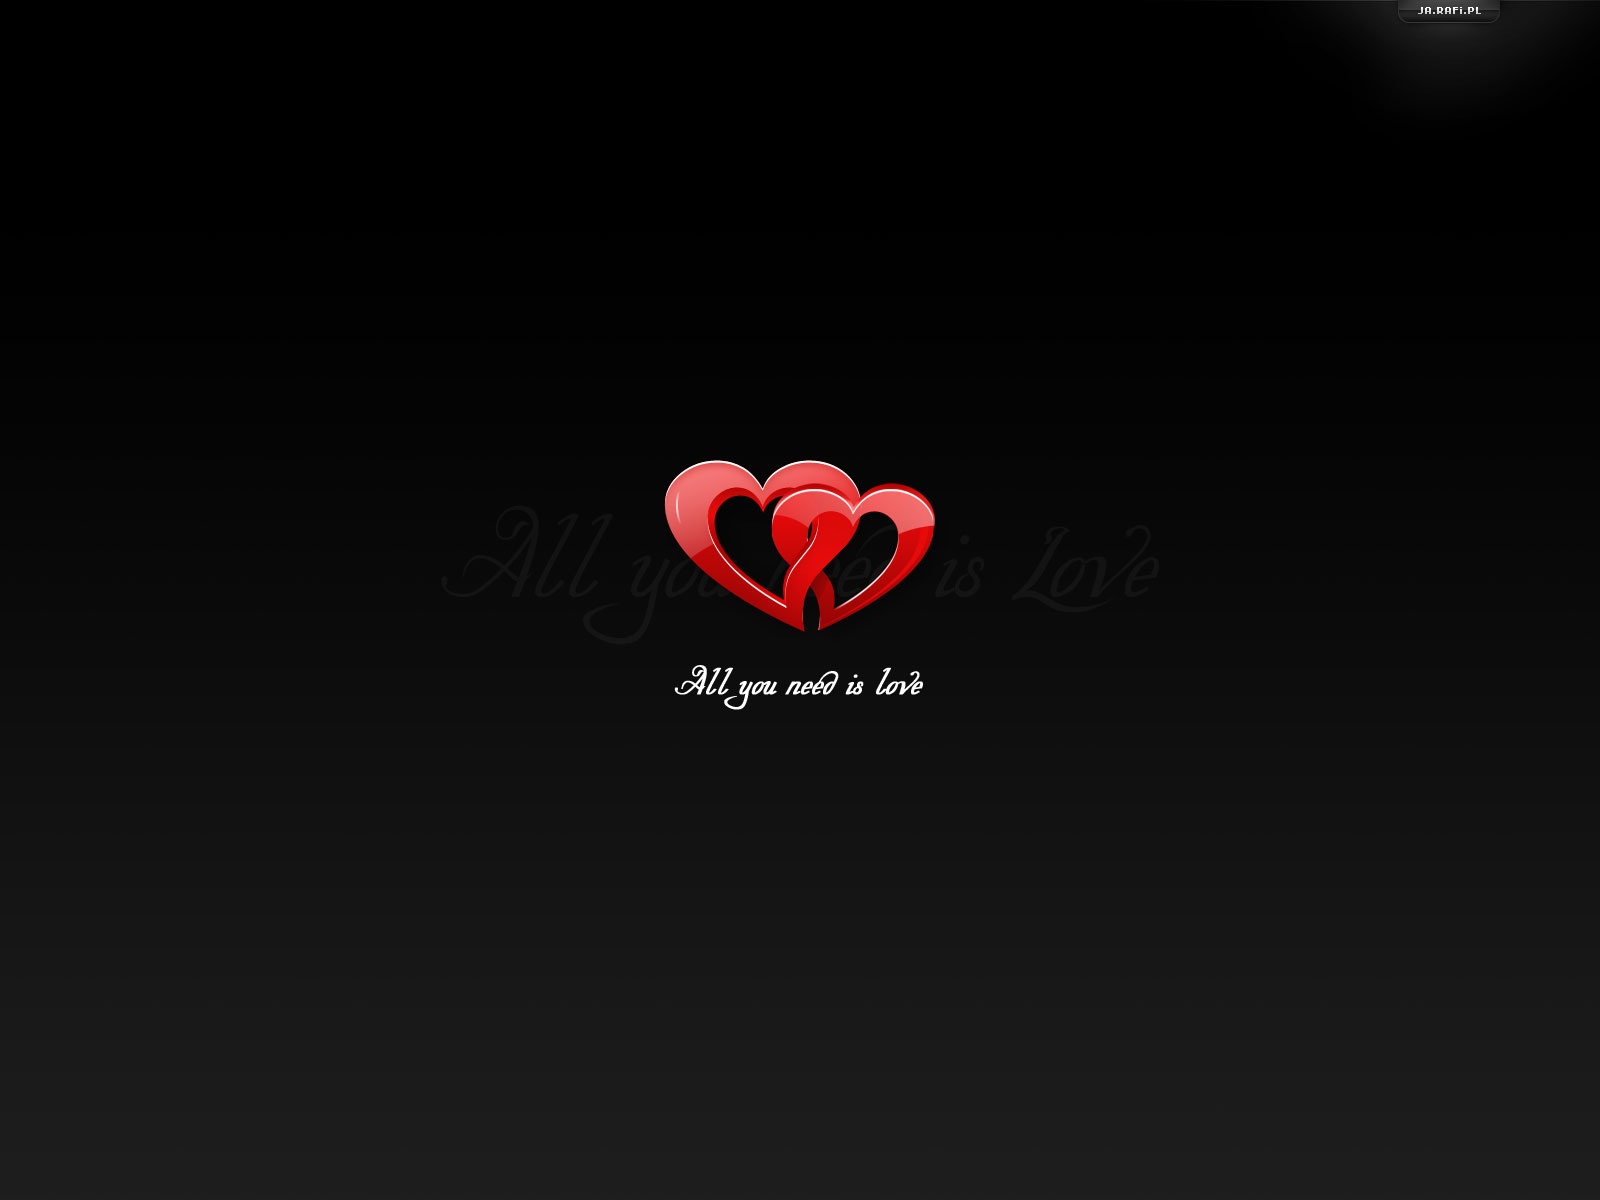 1600x1200 All you need is love desktop PC and Mac wallpaper